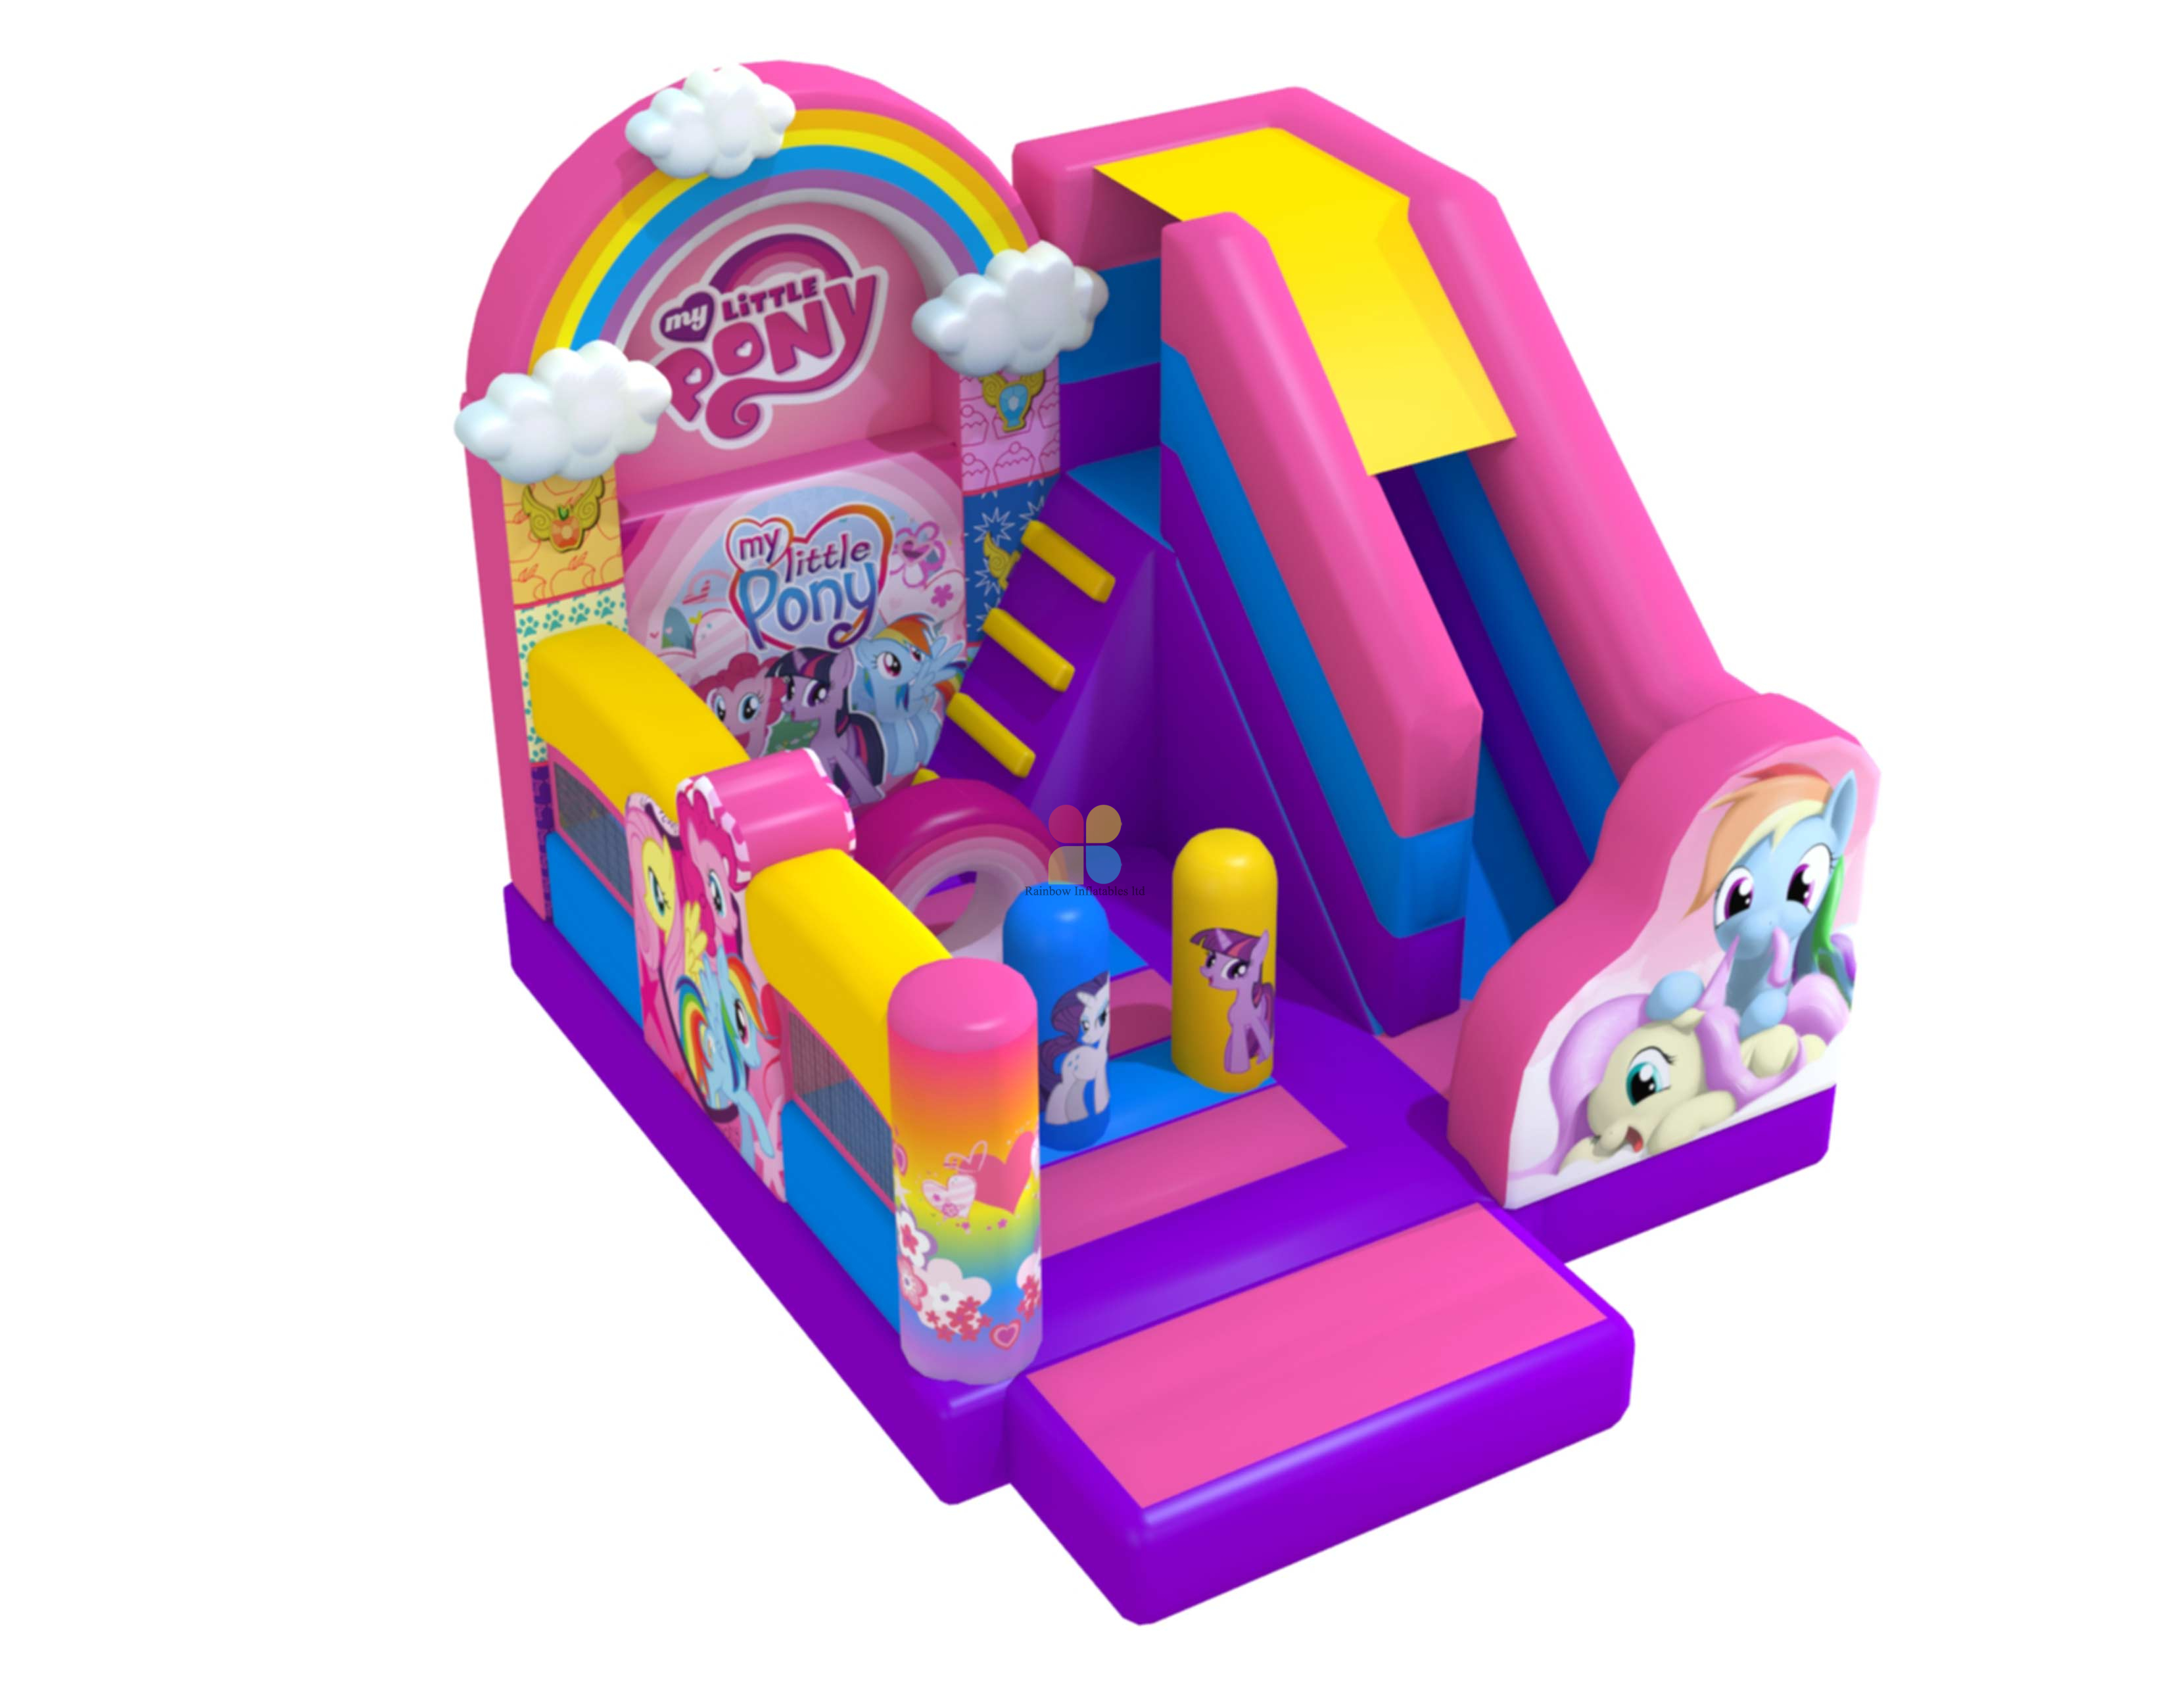 Colorful Pony Bounce and Slide Combo Bouncy Castle